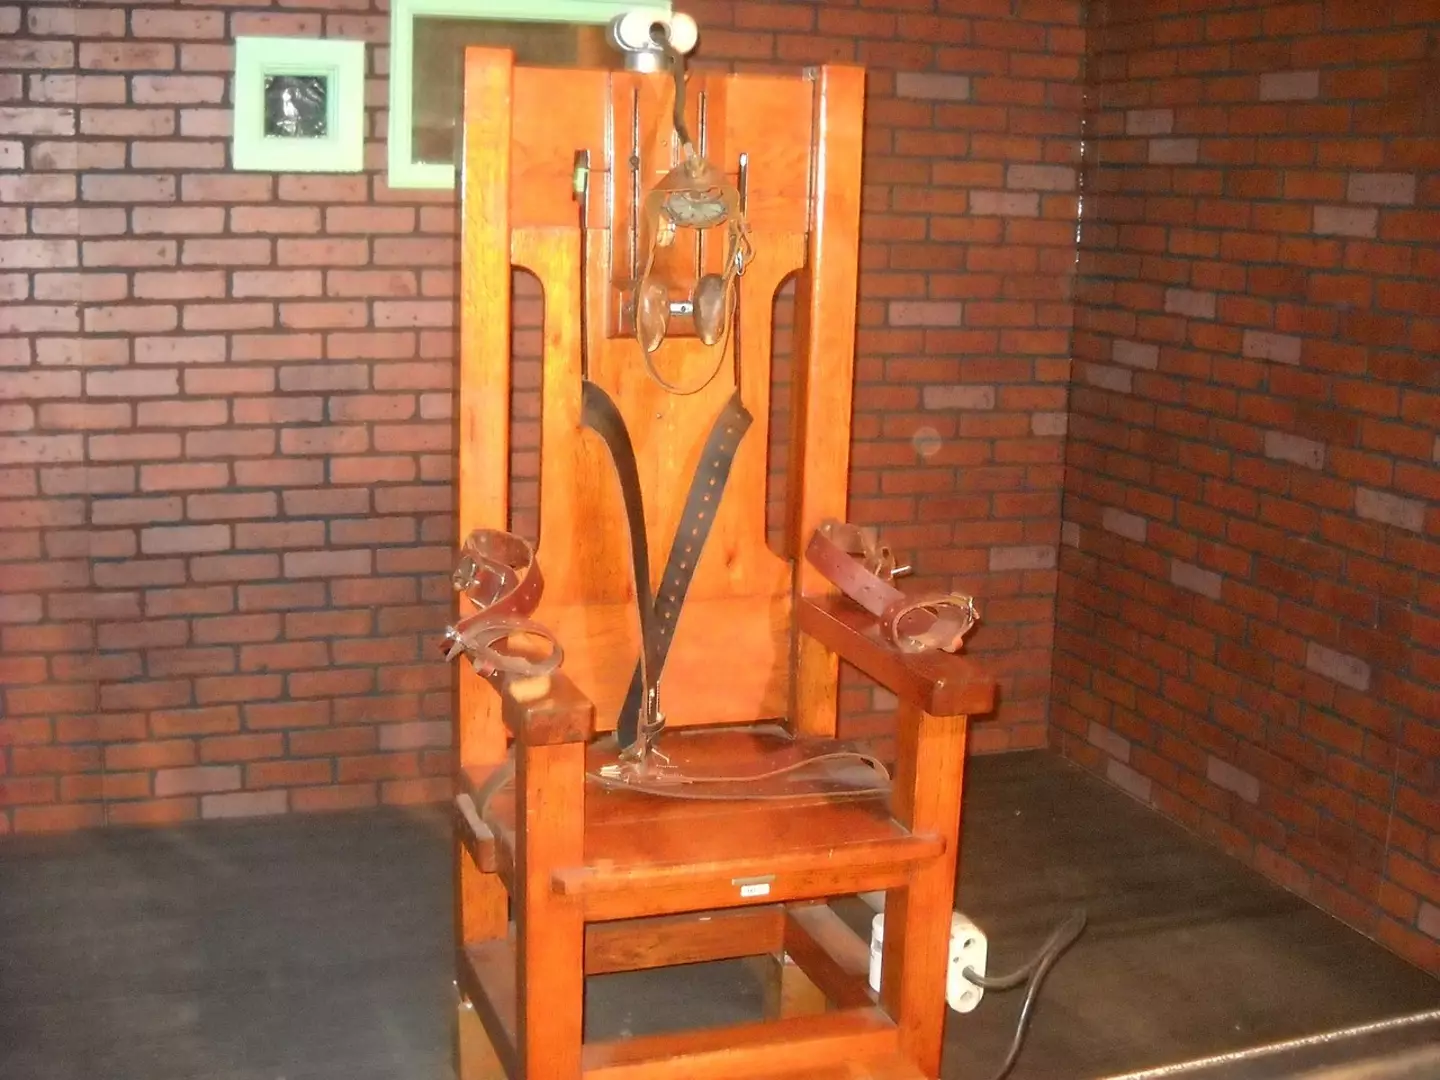 Richard Moore was given the choice between a firing squad and electric chair.